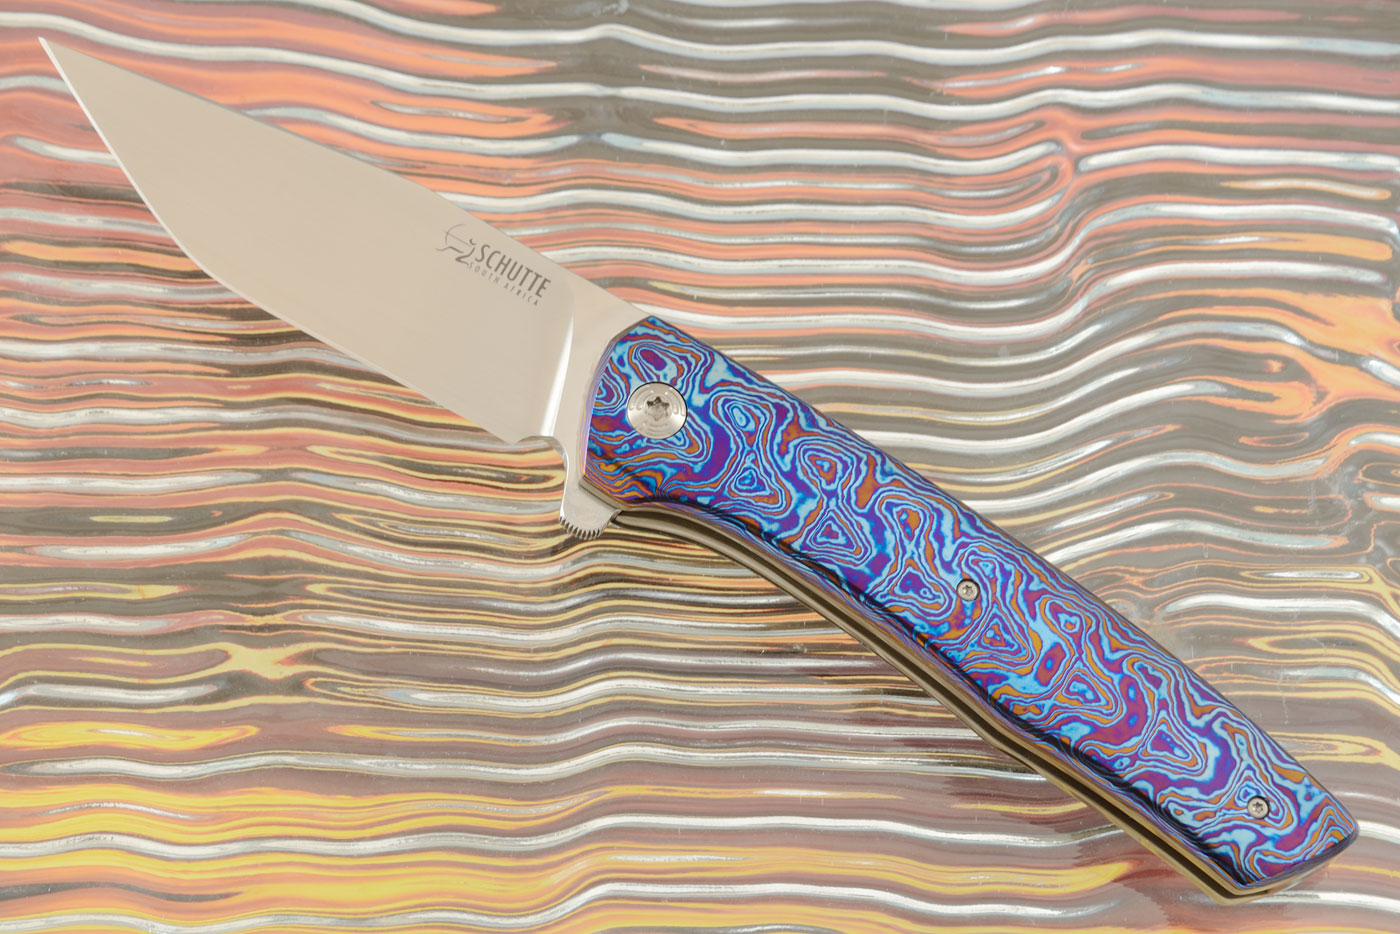 ST1 Flipper with Timascus (IKBS)